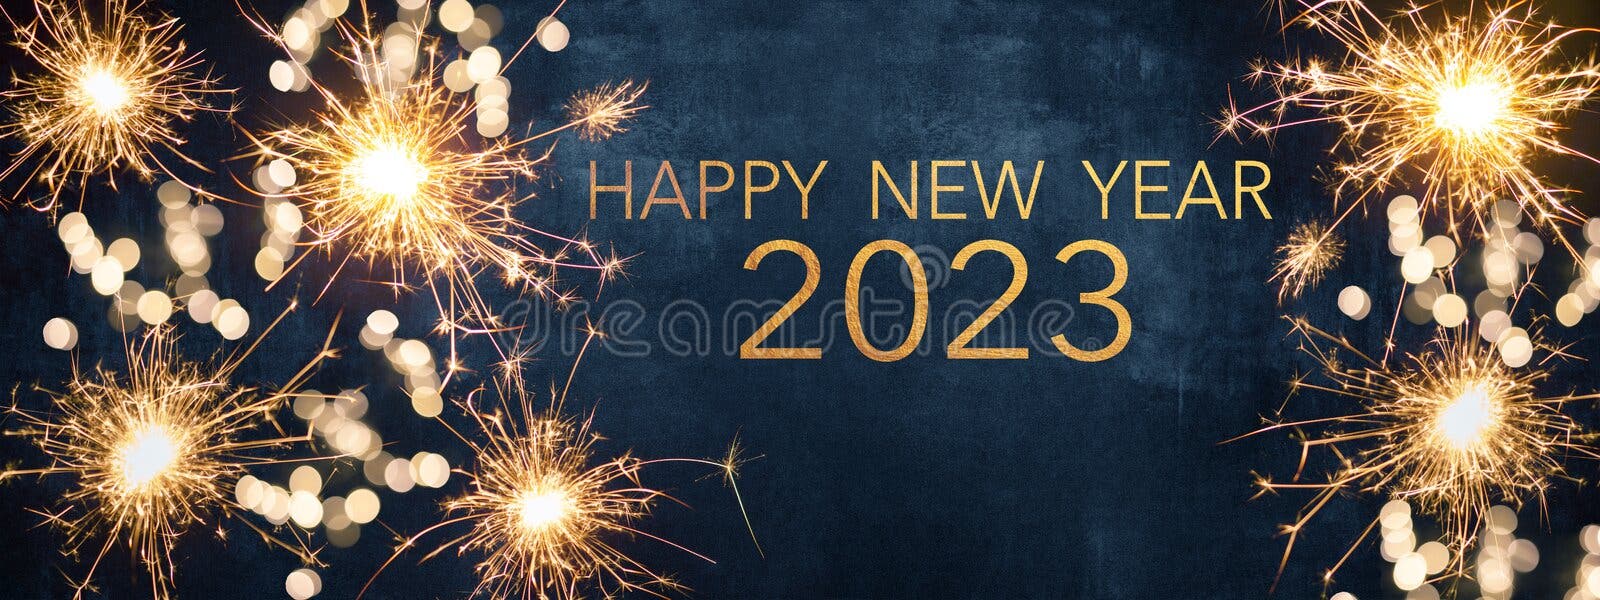 HAPPY NEW YEAR 2023 - Celebration New Year`s Eve, Silvester 2023 ...